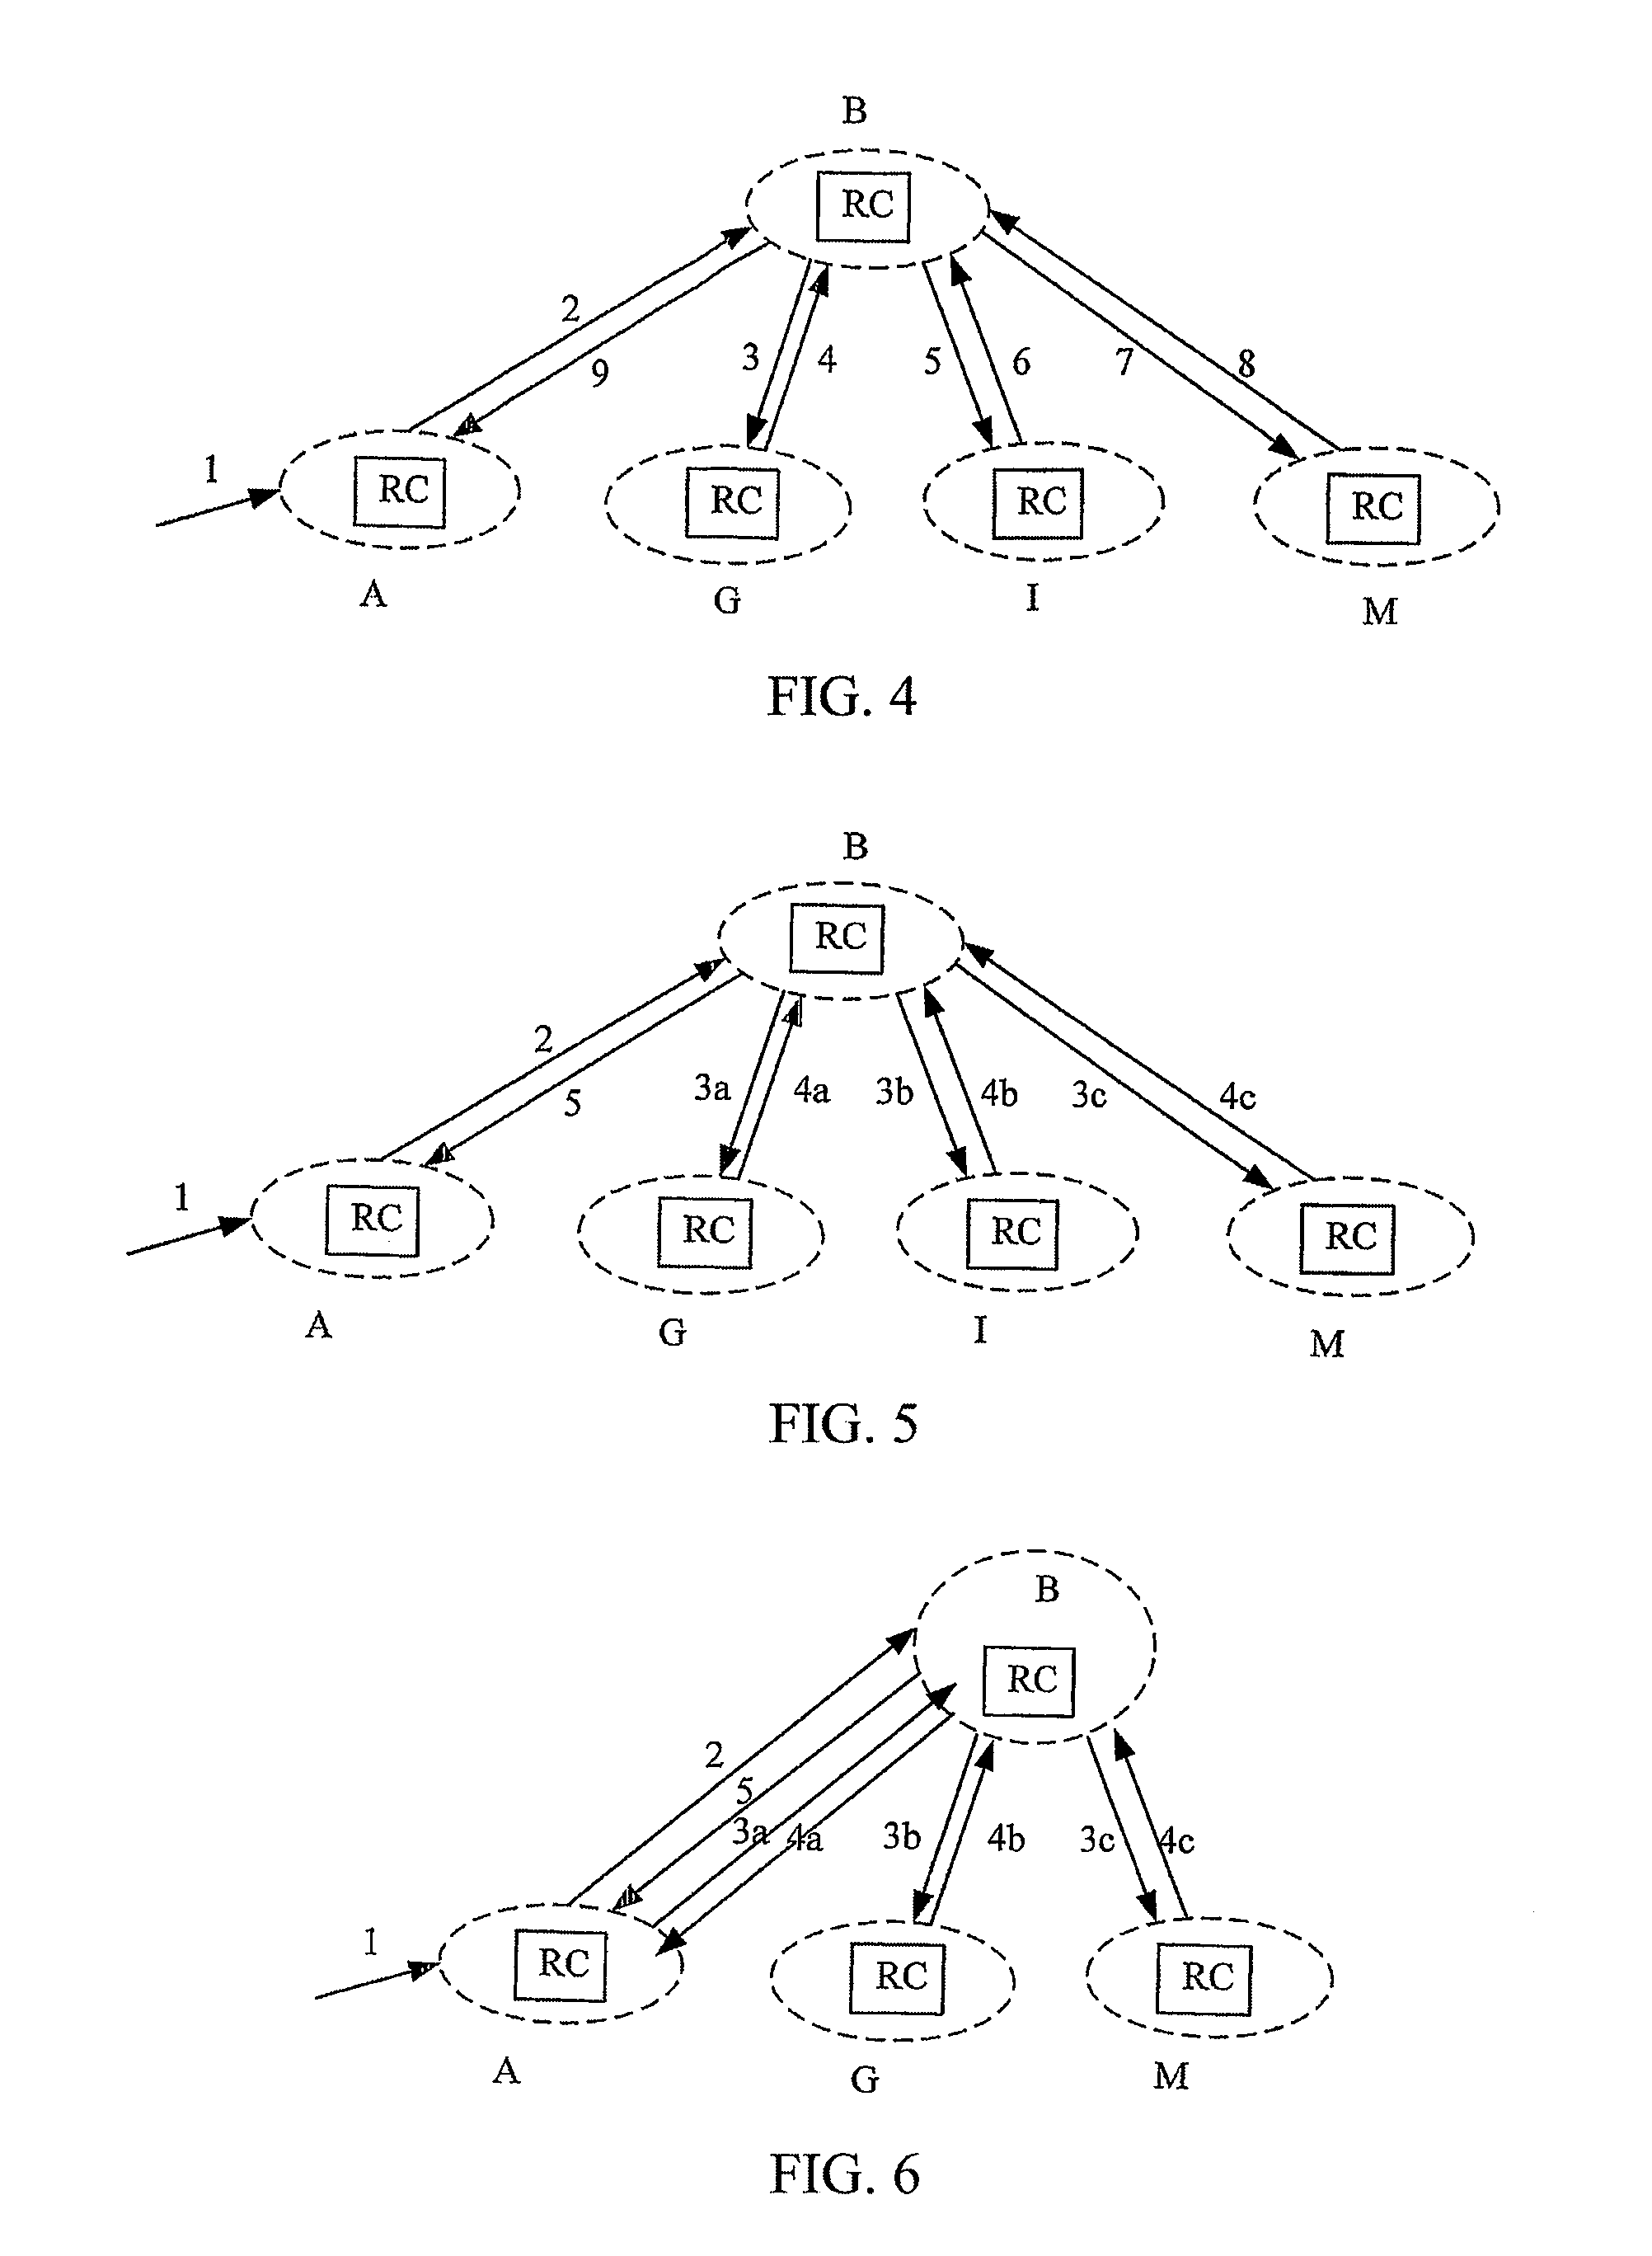 Hierarchical Routing Query Method of Automatic Switched Optical Network